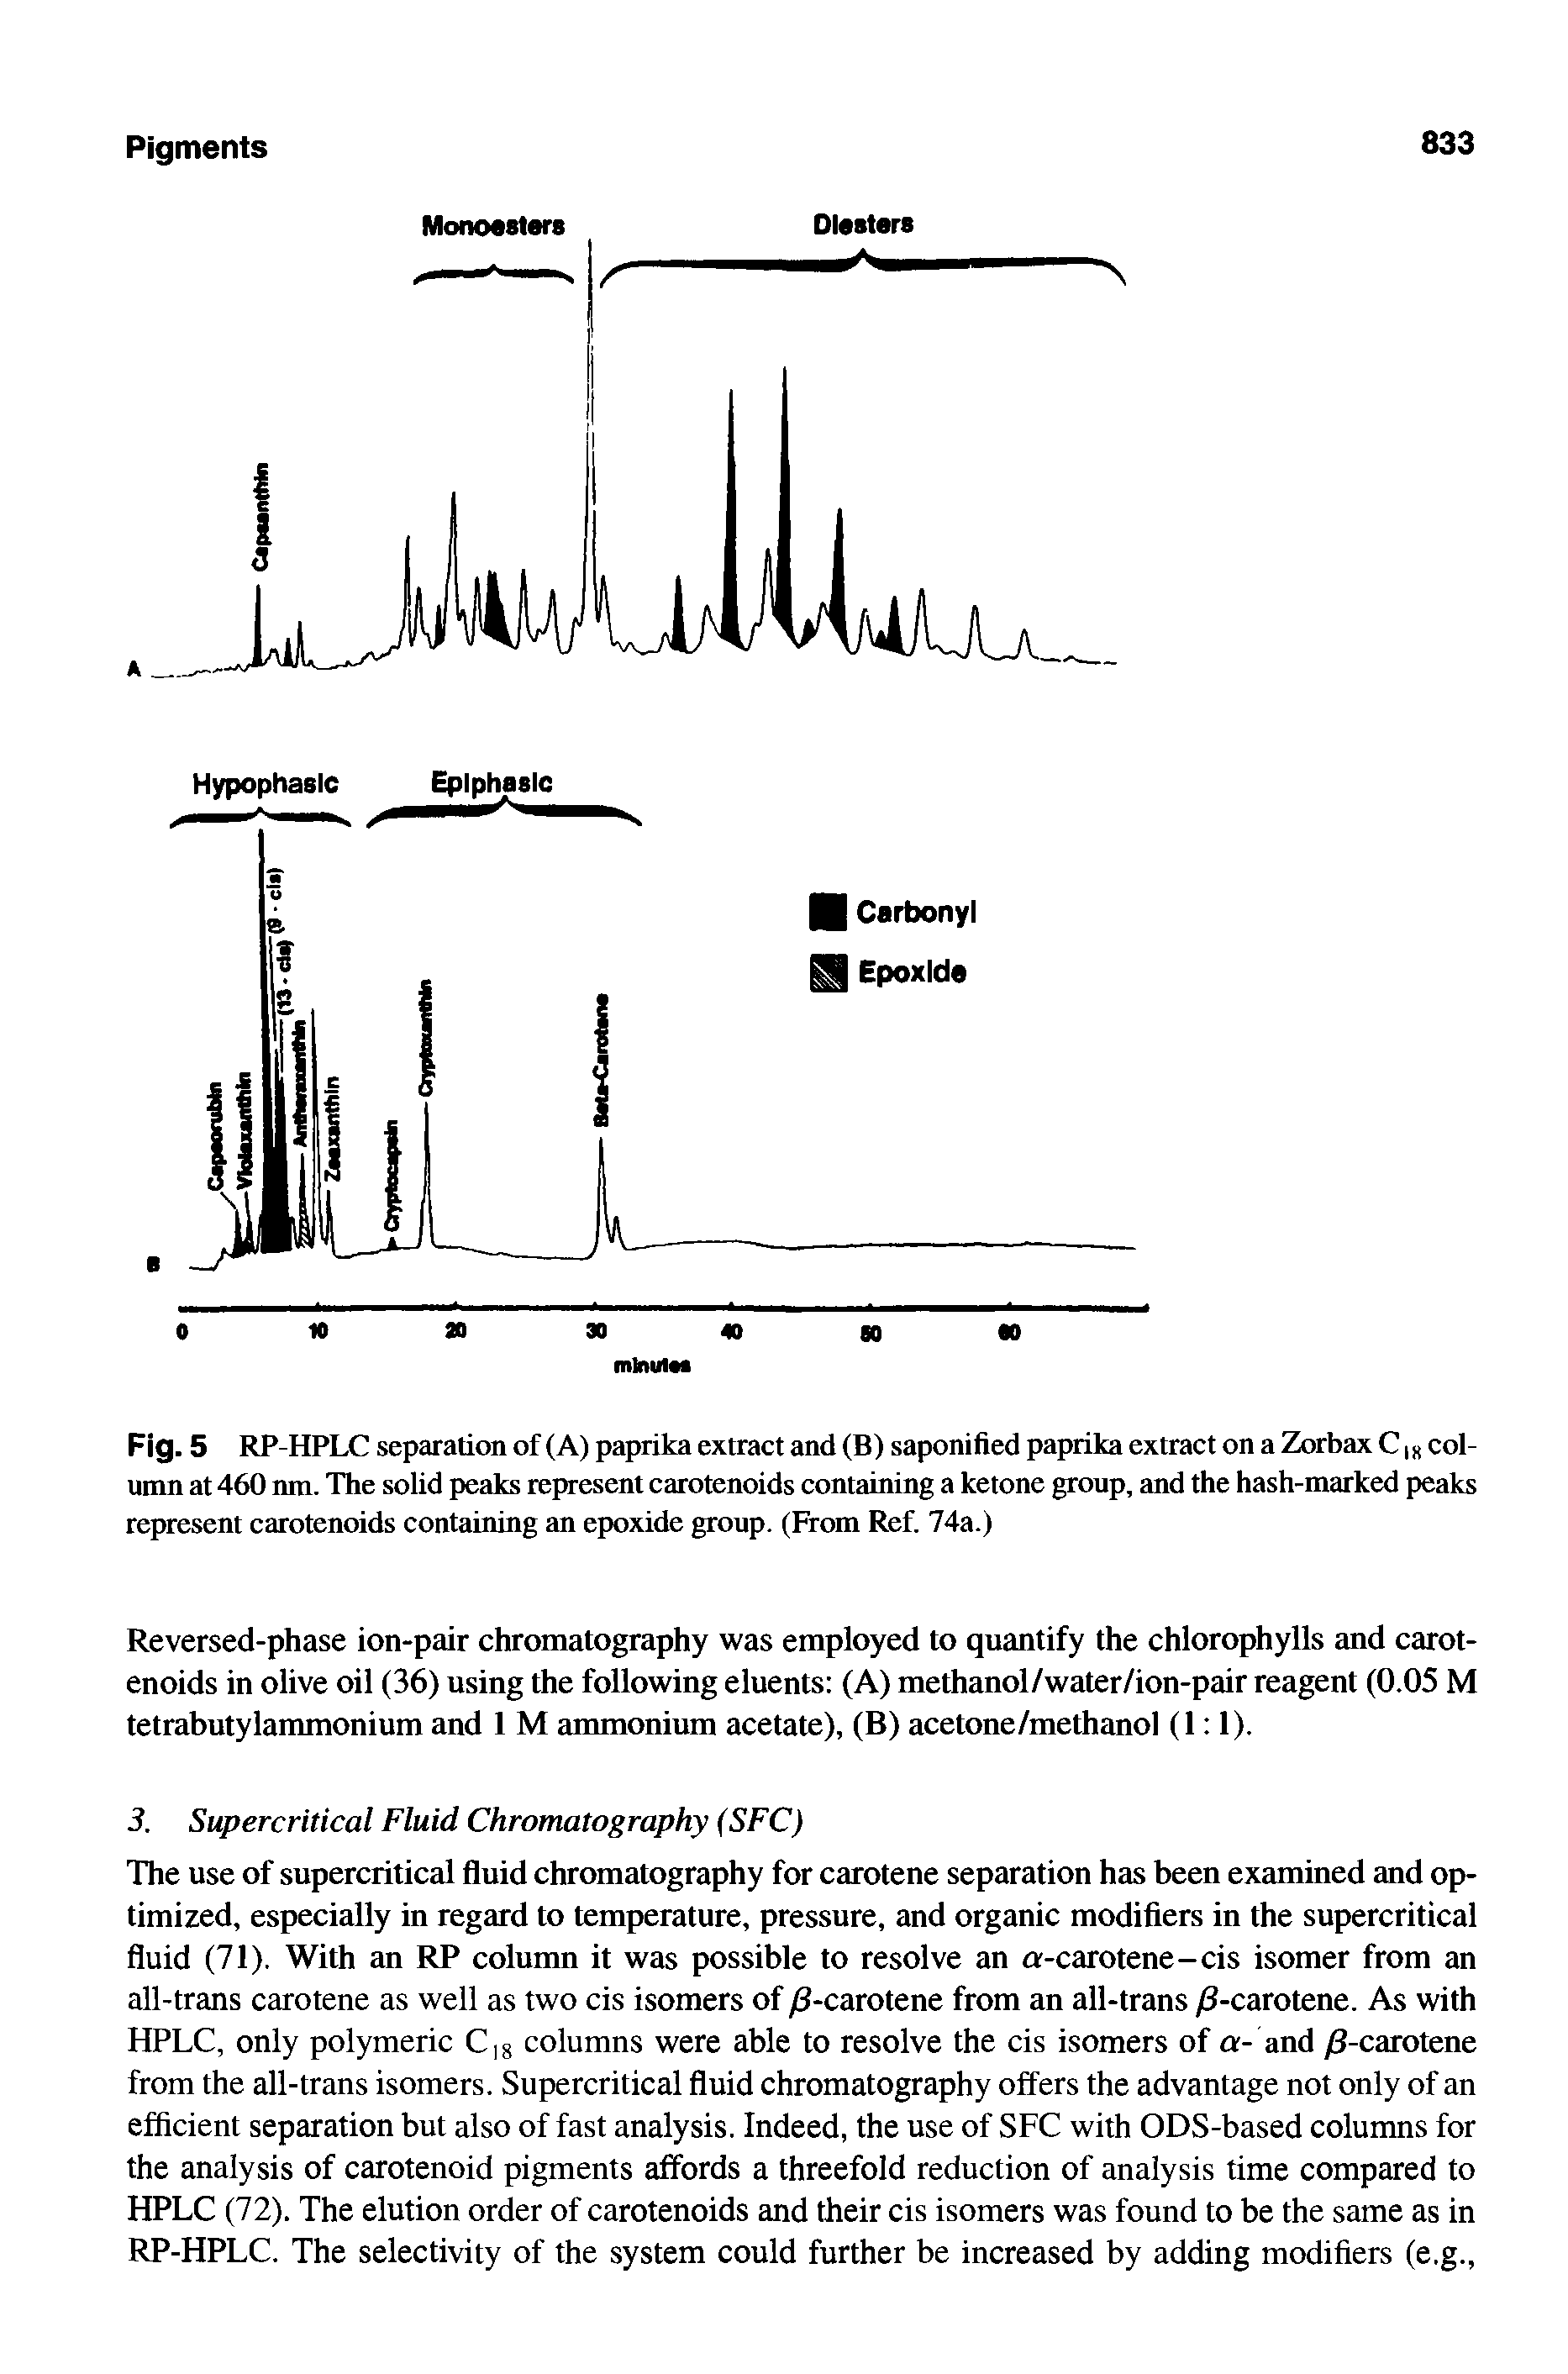 Fig. 5 RP-HPLC separation of (A) paprika extract and (B) saponified paprika extract on a Zorbax C l8 column at 460 nm. The solid peaks represent carotenoids containing a ketone group, and the hash-marked peaks represent carotenoids containing an epoxide group. (From Ref. 74a.)...